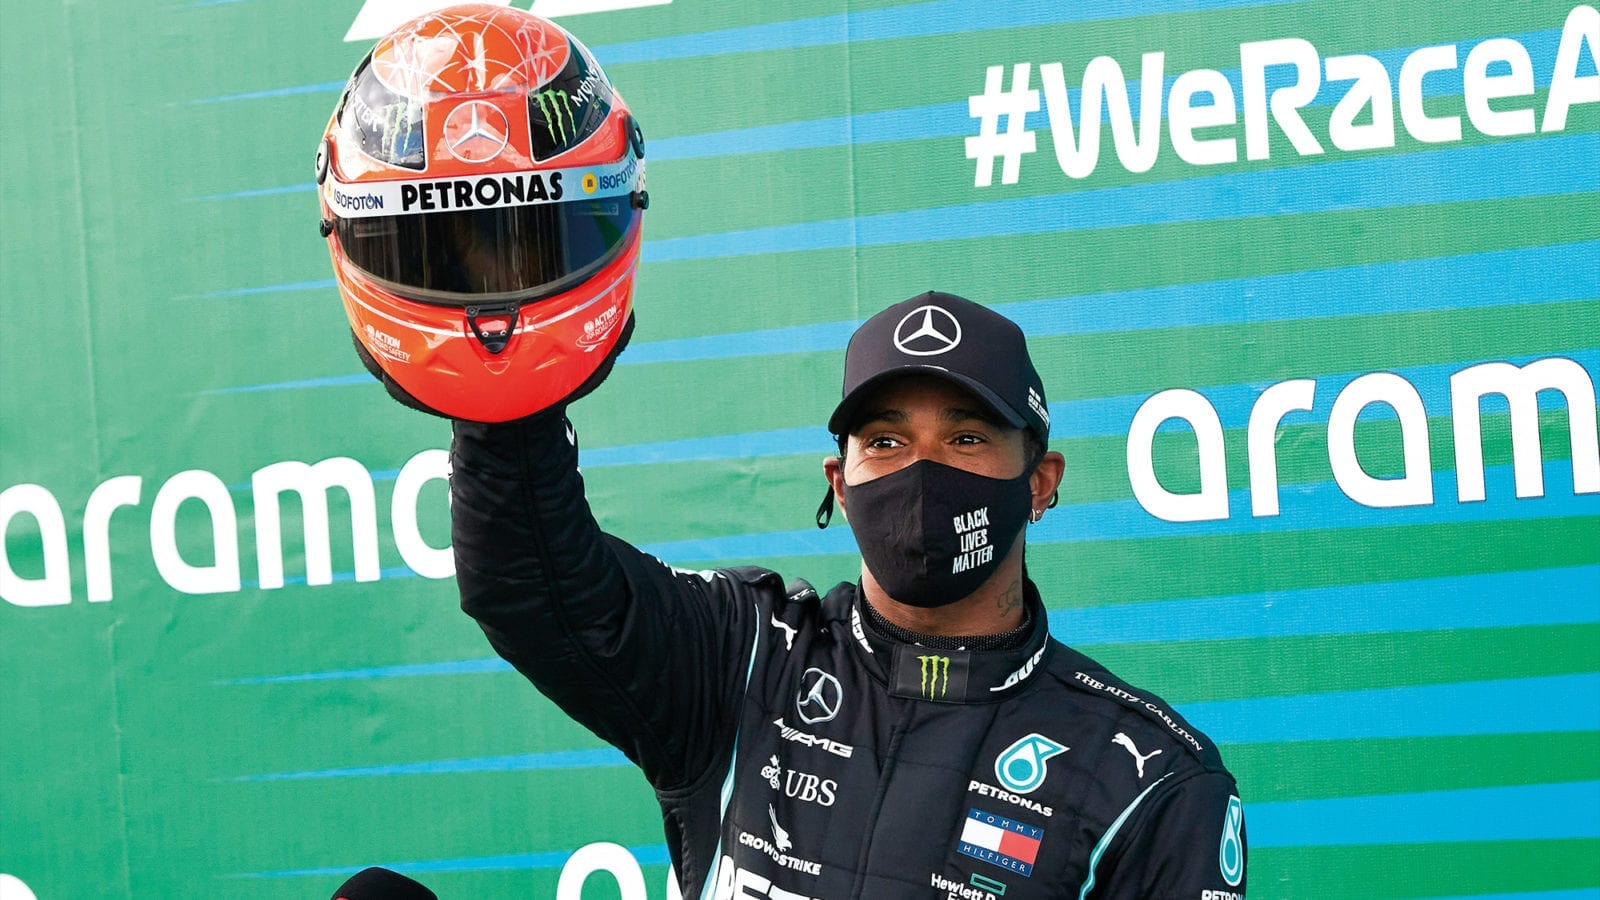 Lewis Hamilton holds up Michael Schumacher's helmet that he was given after equalling the record for the number of F1 wins atthe 2020 Eifel Grand prix